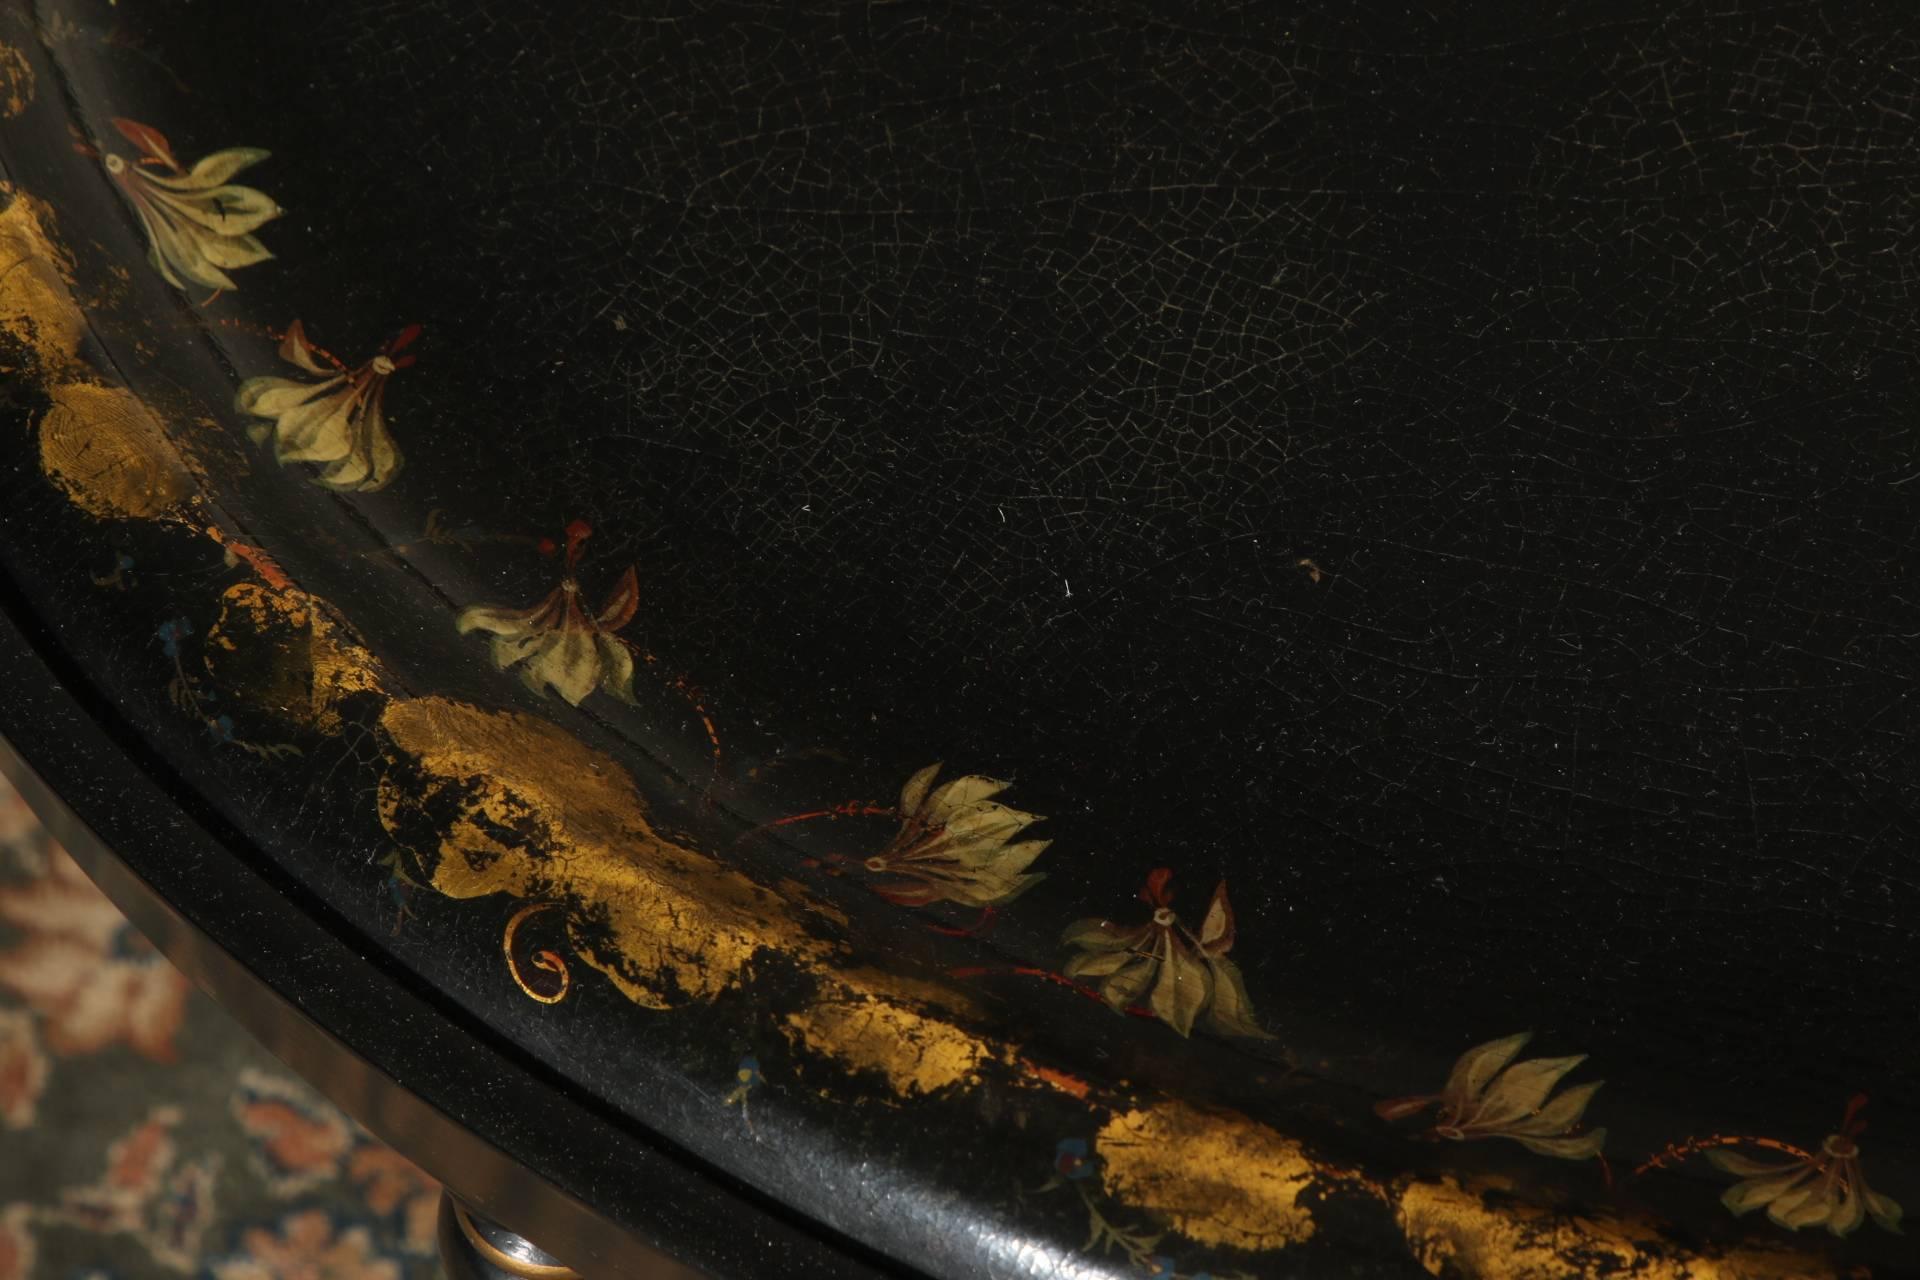 Ebonized oval with the tray inset in one piece with the stand. The tray with raised border decorated with a band of clusters of gilt leaves with pendant red and white flowers. The ebonized stand with turned splayed legs with gilt details and faux